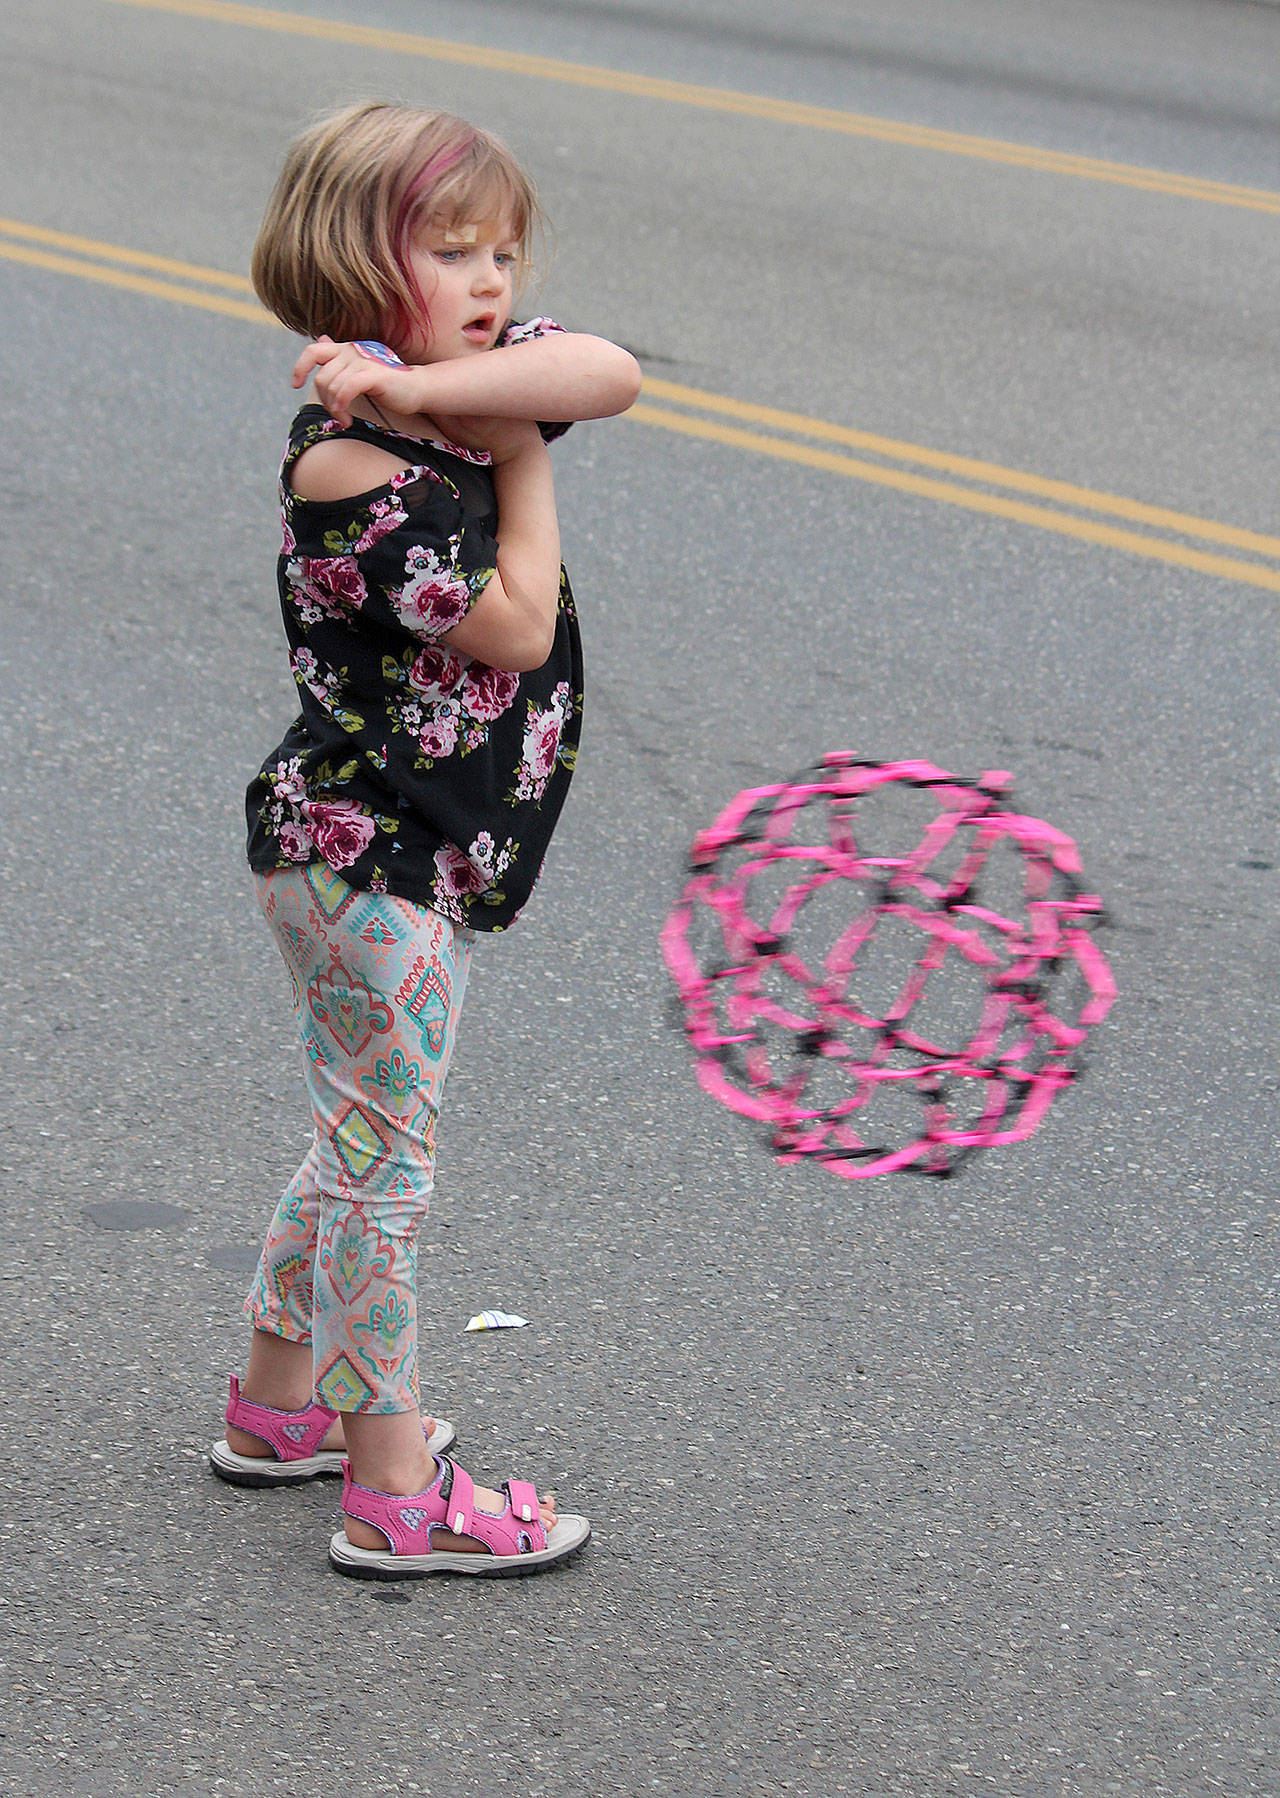 This young parade watcher brought along her own crowd dazzler on the parade sidelines. (Bob Smith | Kitsap Daily News)